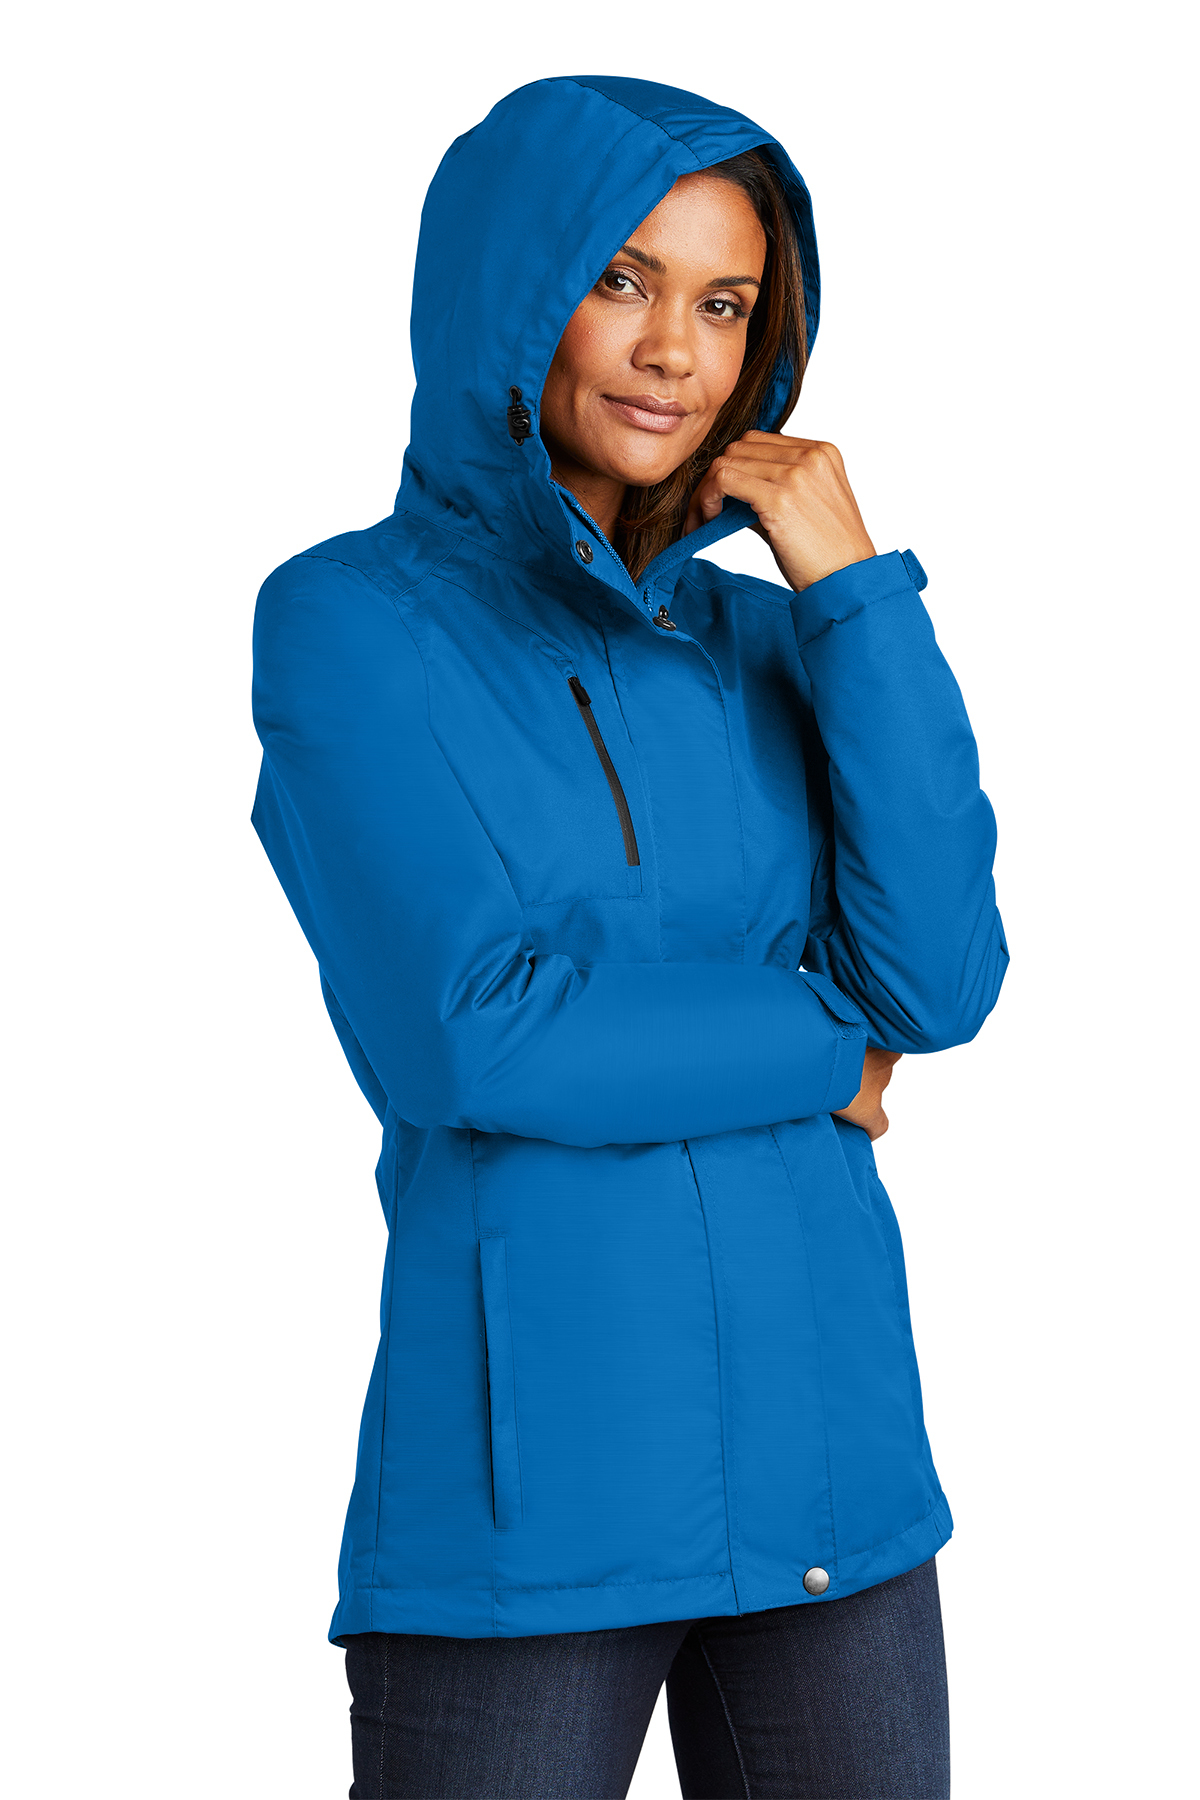 Jacket Ladies Port SanMar Authority All-Conditions Product | |